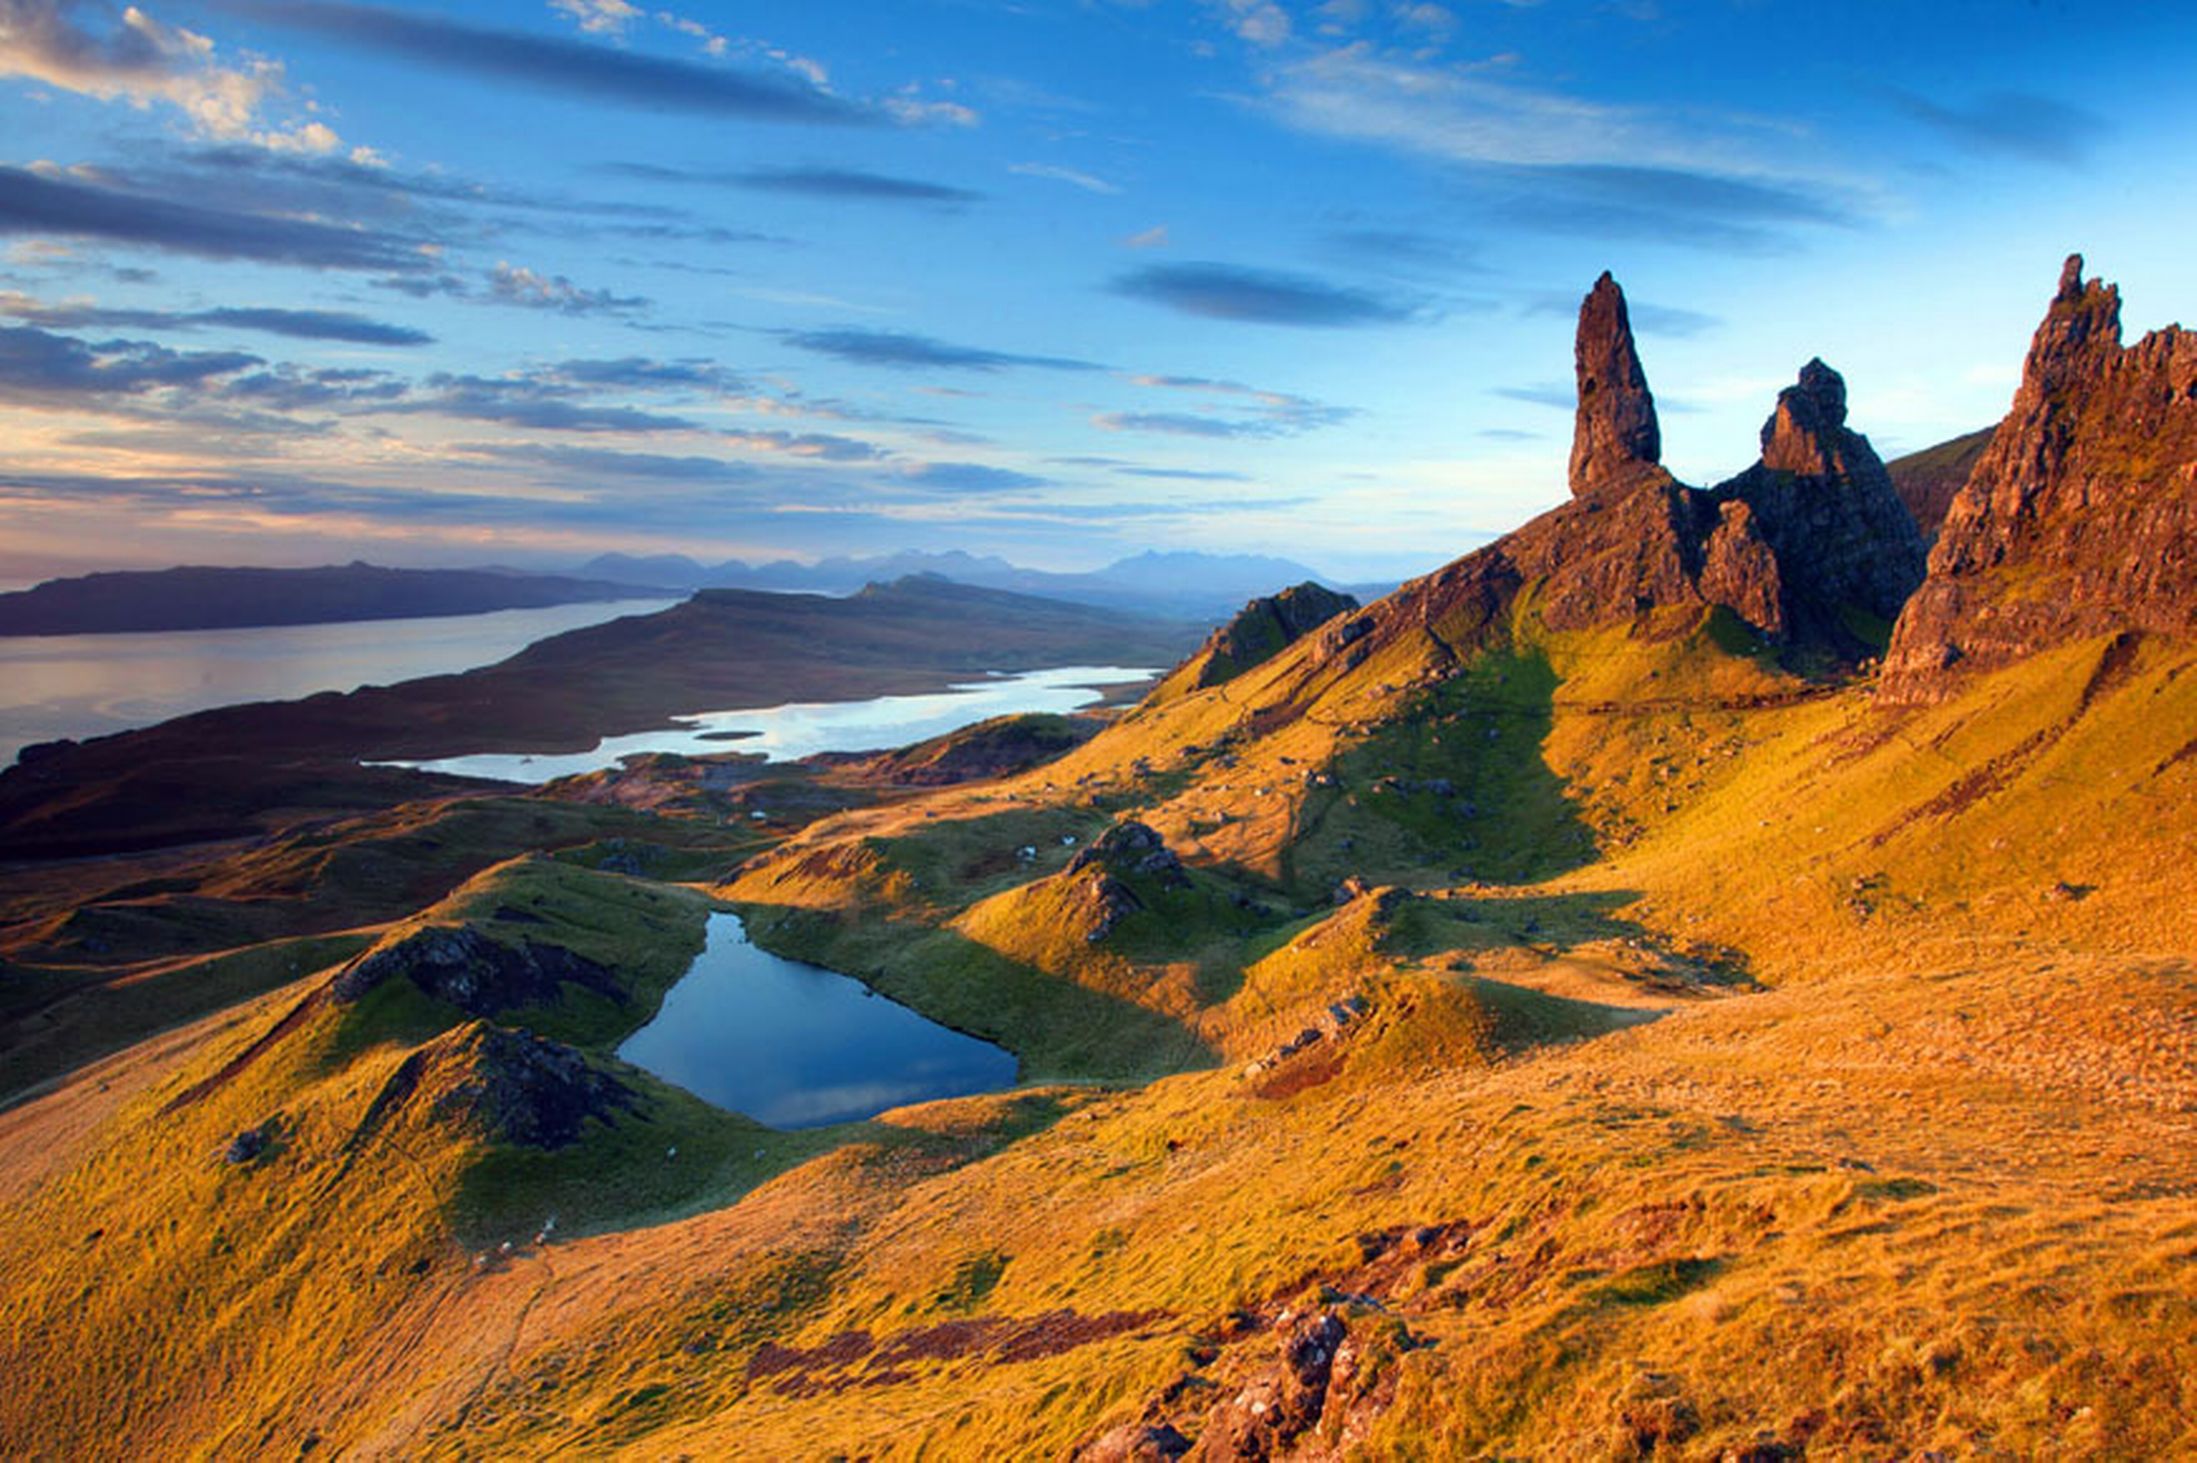 Sunrise-over-the-Old-Man-of-Storr-on-the-Isle-of-Skye-2641169